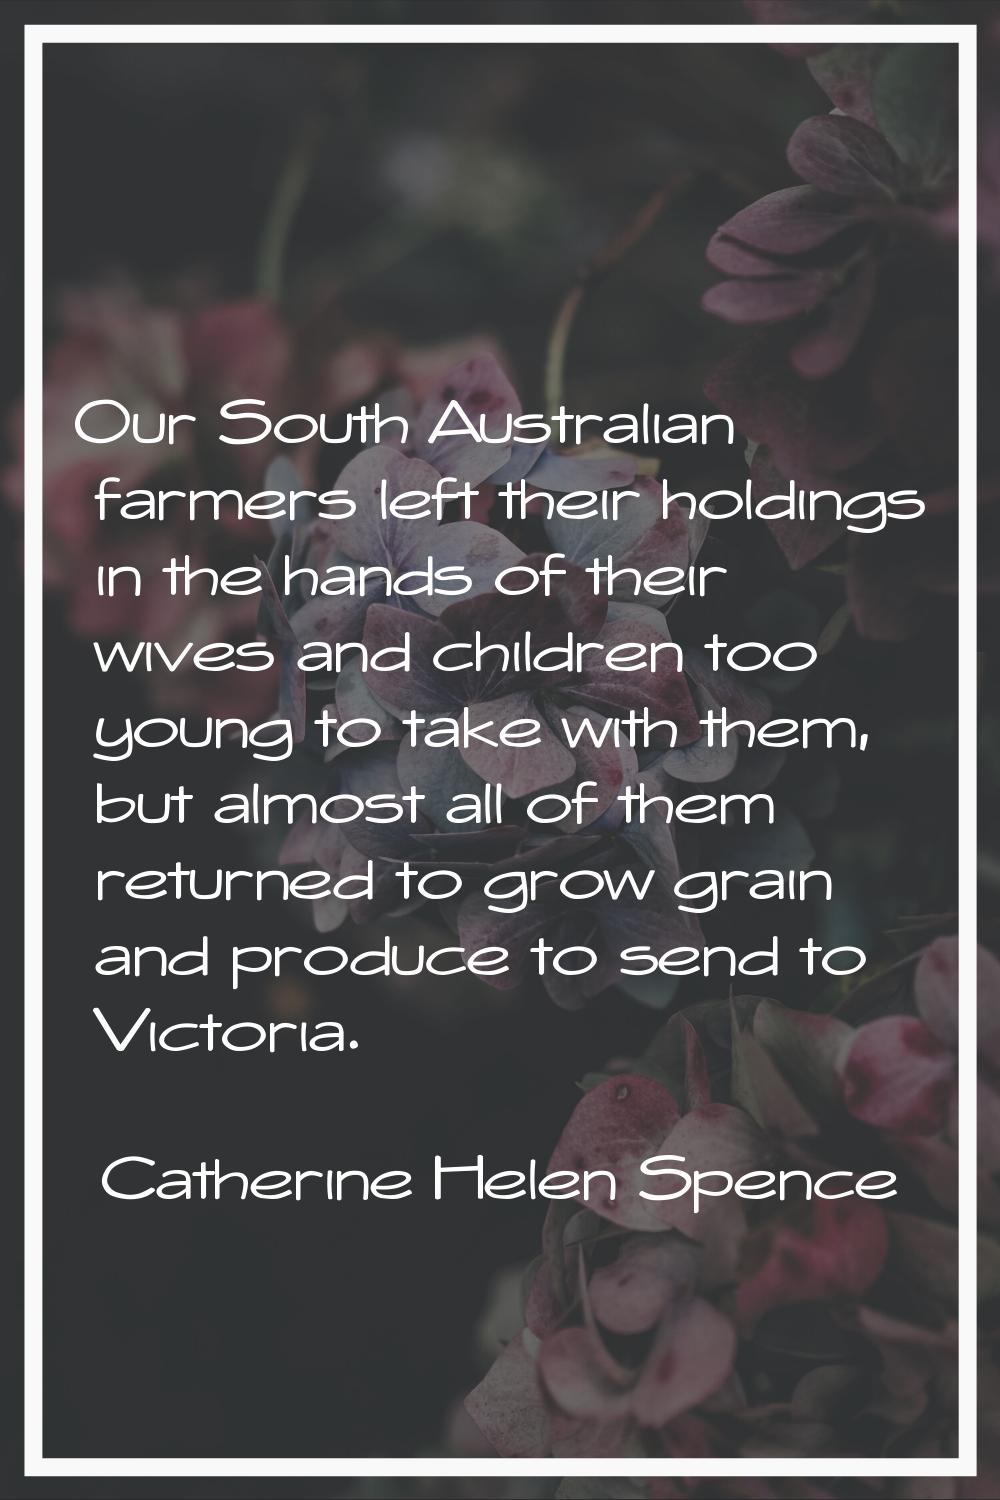 Our South Australian farmers left their holdings in the hands of their wives and children too young